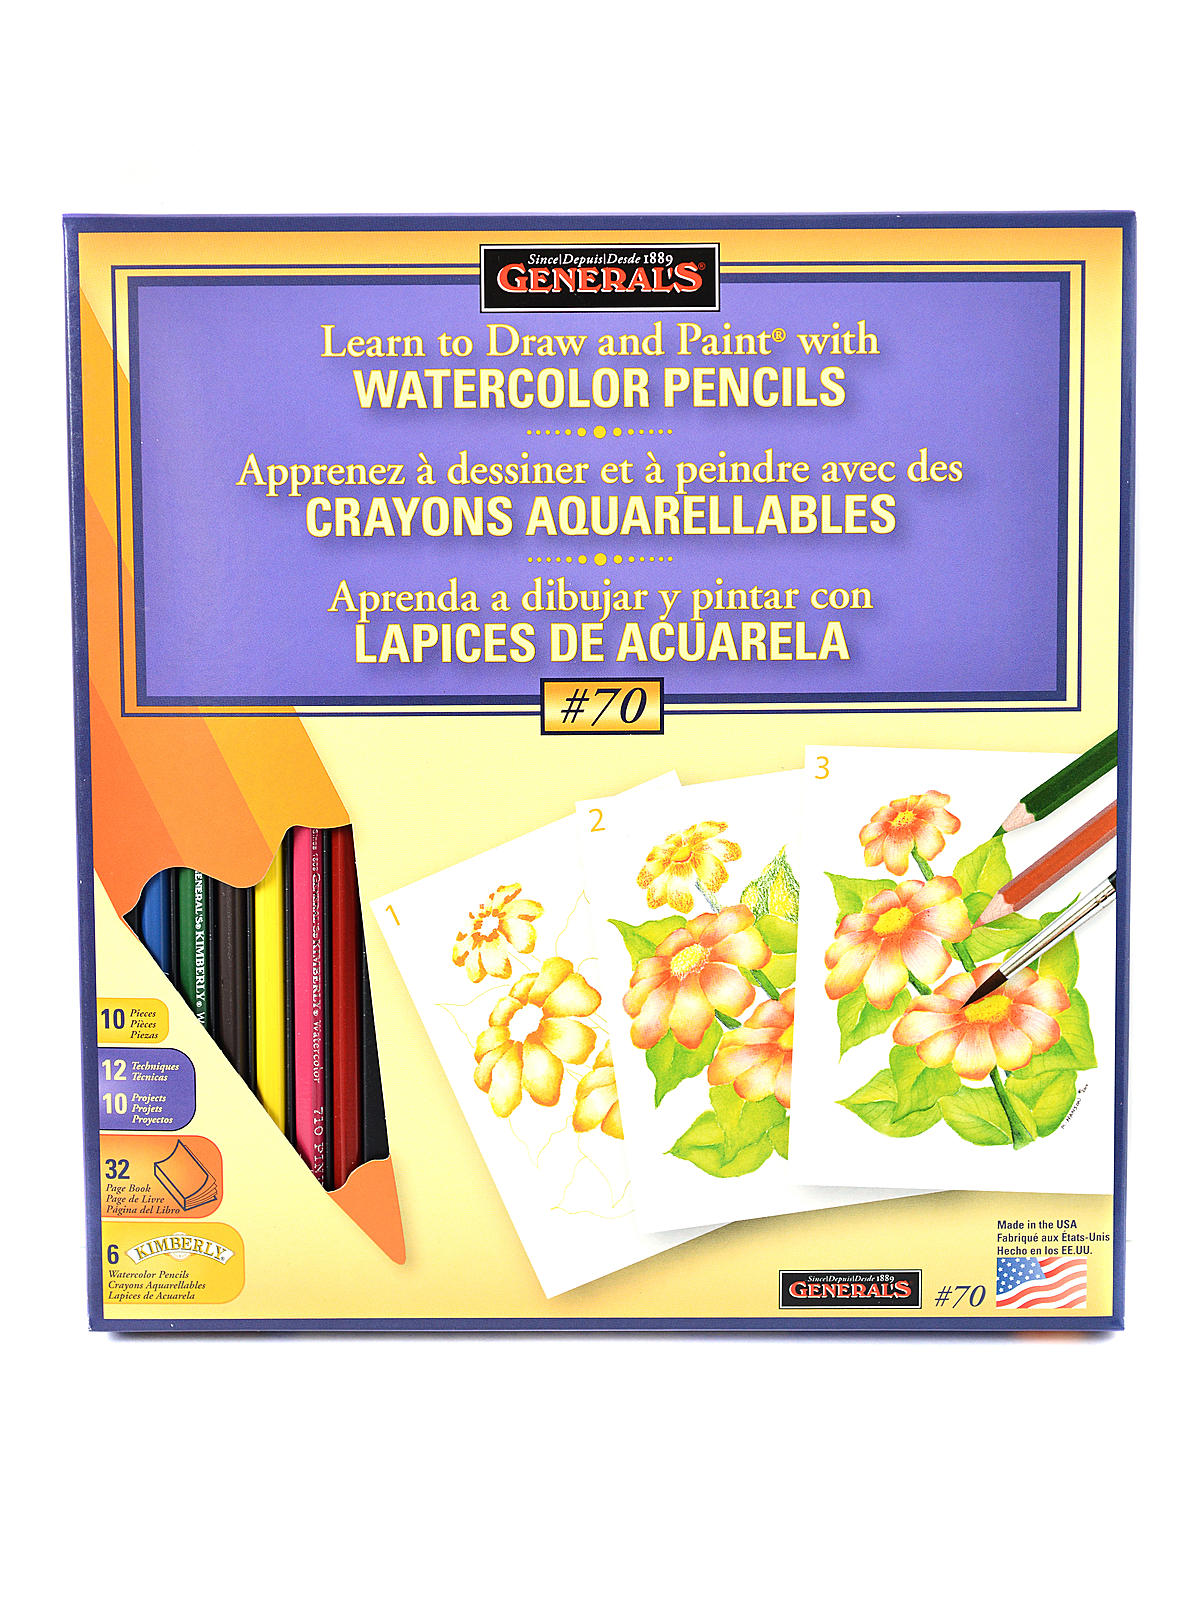 General's - Learn  Watercolor Pencil Techniques Now! Kit #70